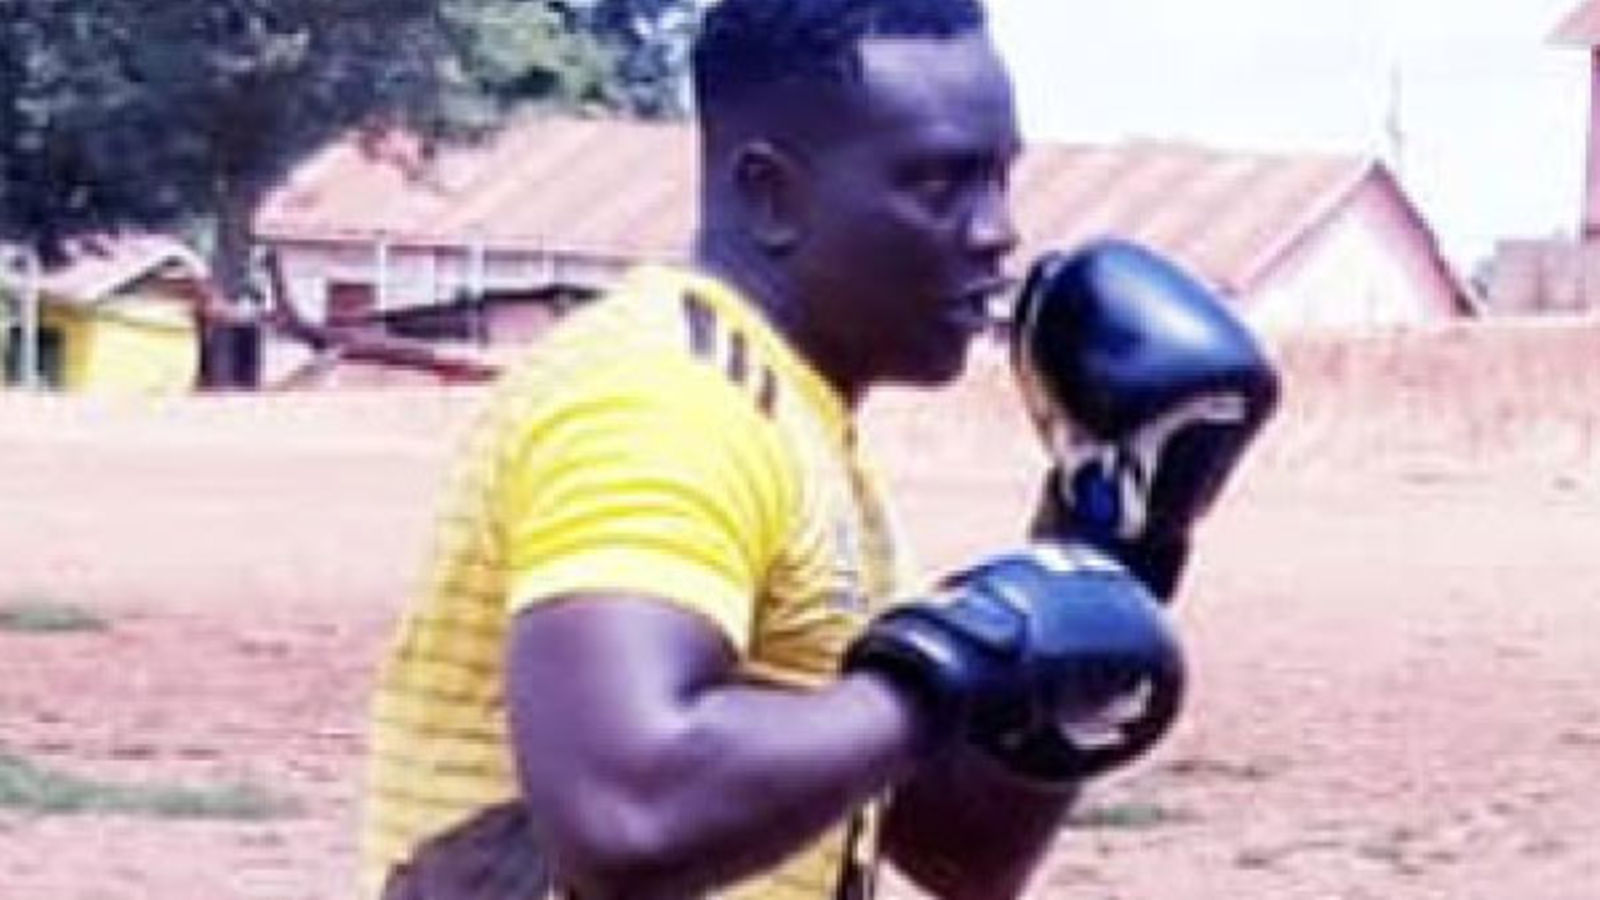 Shadow Boxing: UBF introduces new form of 'virtual boxing competition